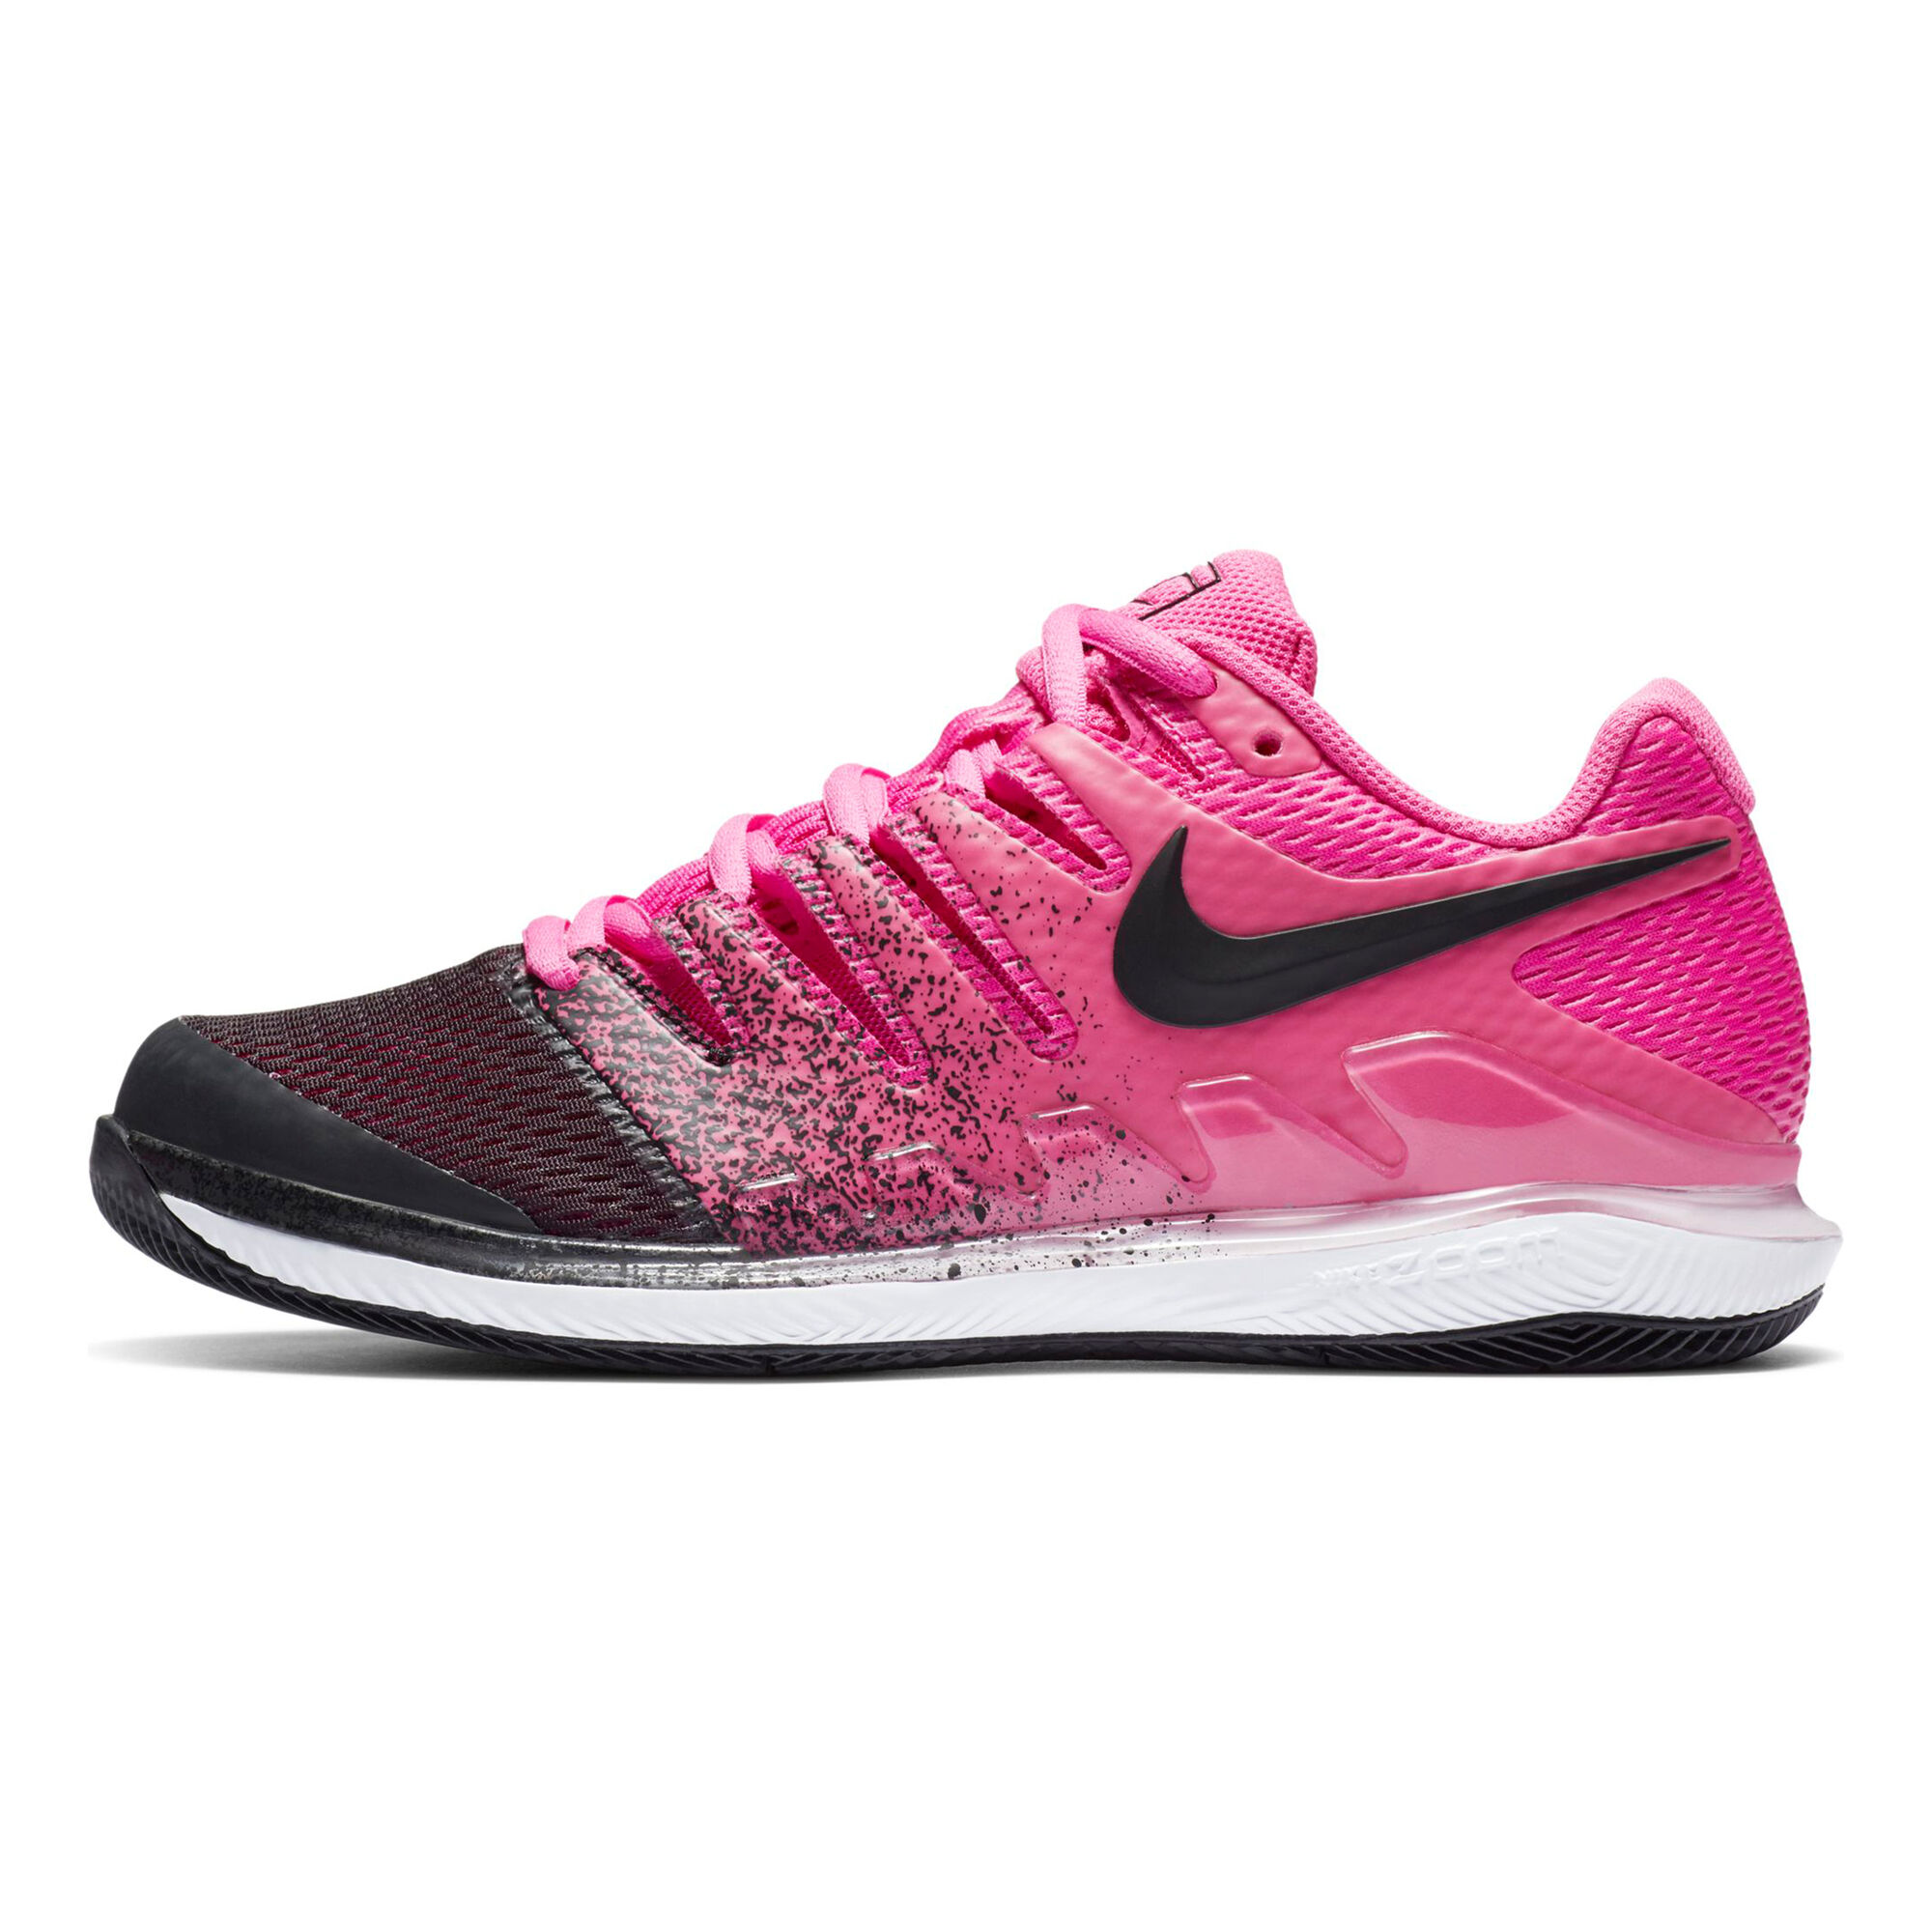 Nike Air Zoom X Mujeres - Rosa, Negro compra online | Tennis-Point